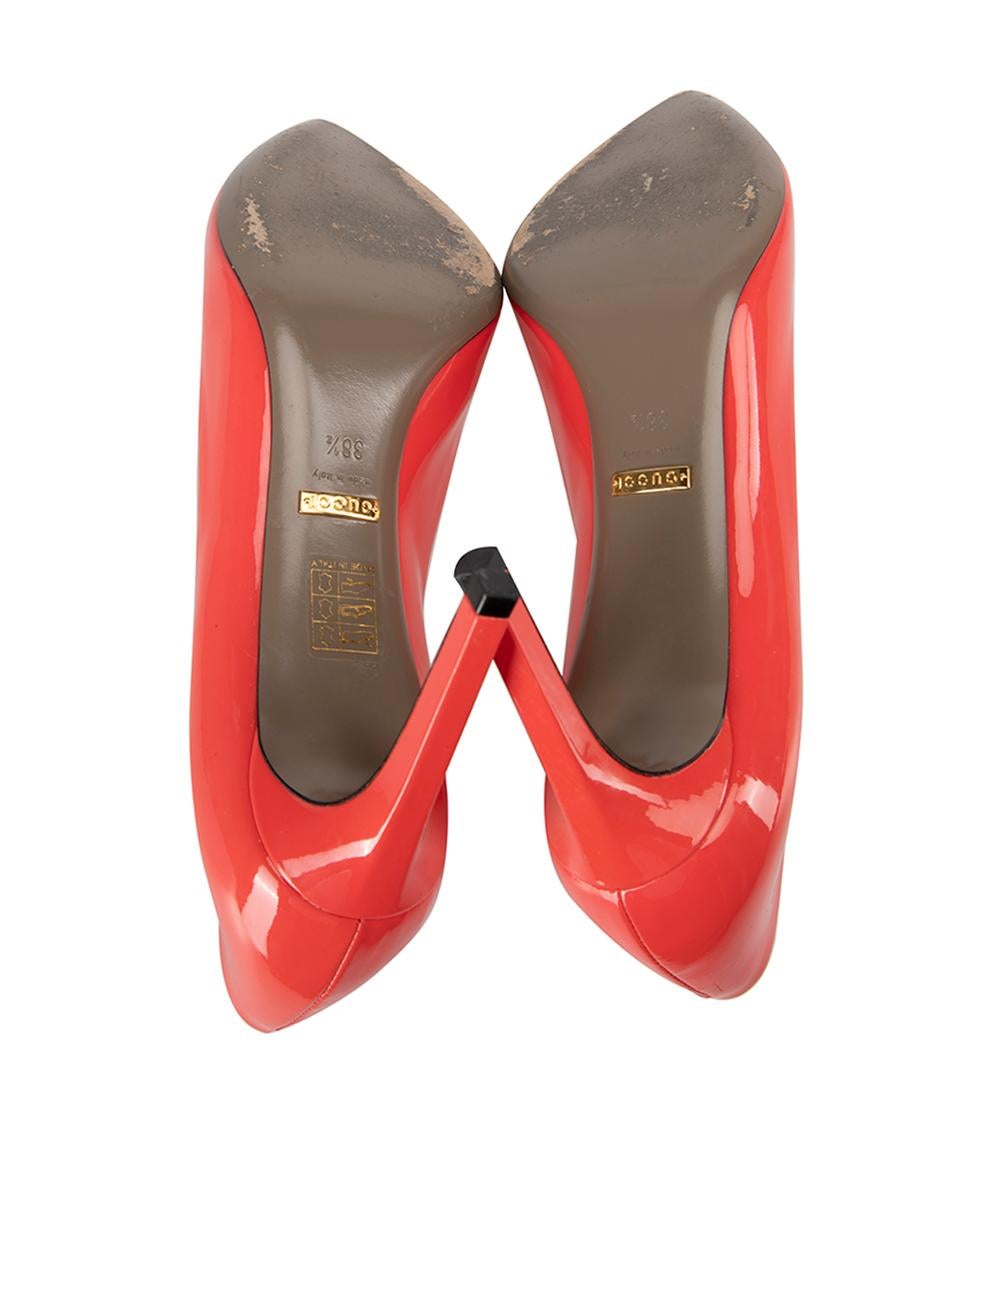 Women's Coral Patent Leather Pointed Toe Heels Size IT 38.5 For Sale